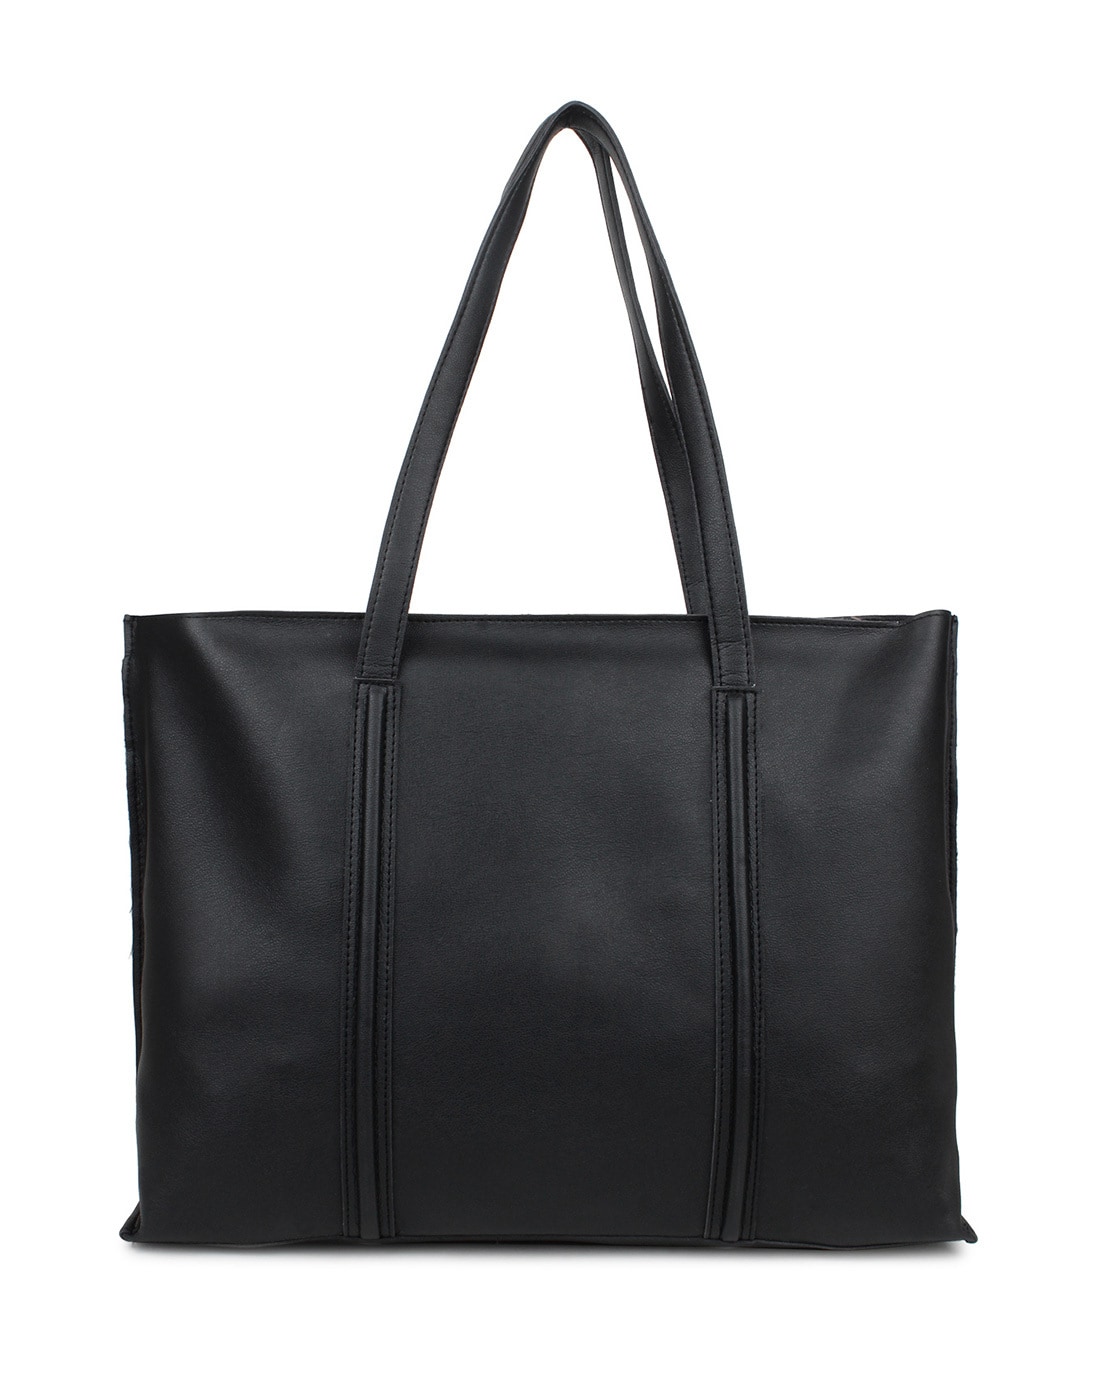 Buy Tote bags With Zipper Online In India At Best Price Offers | Tata CLiQ